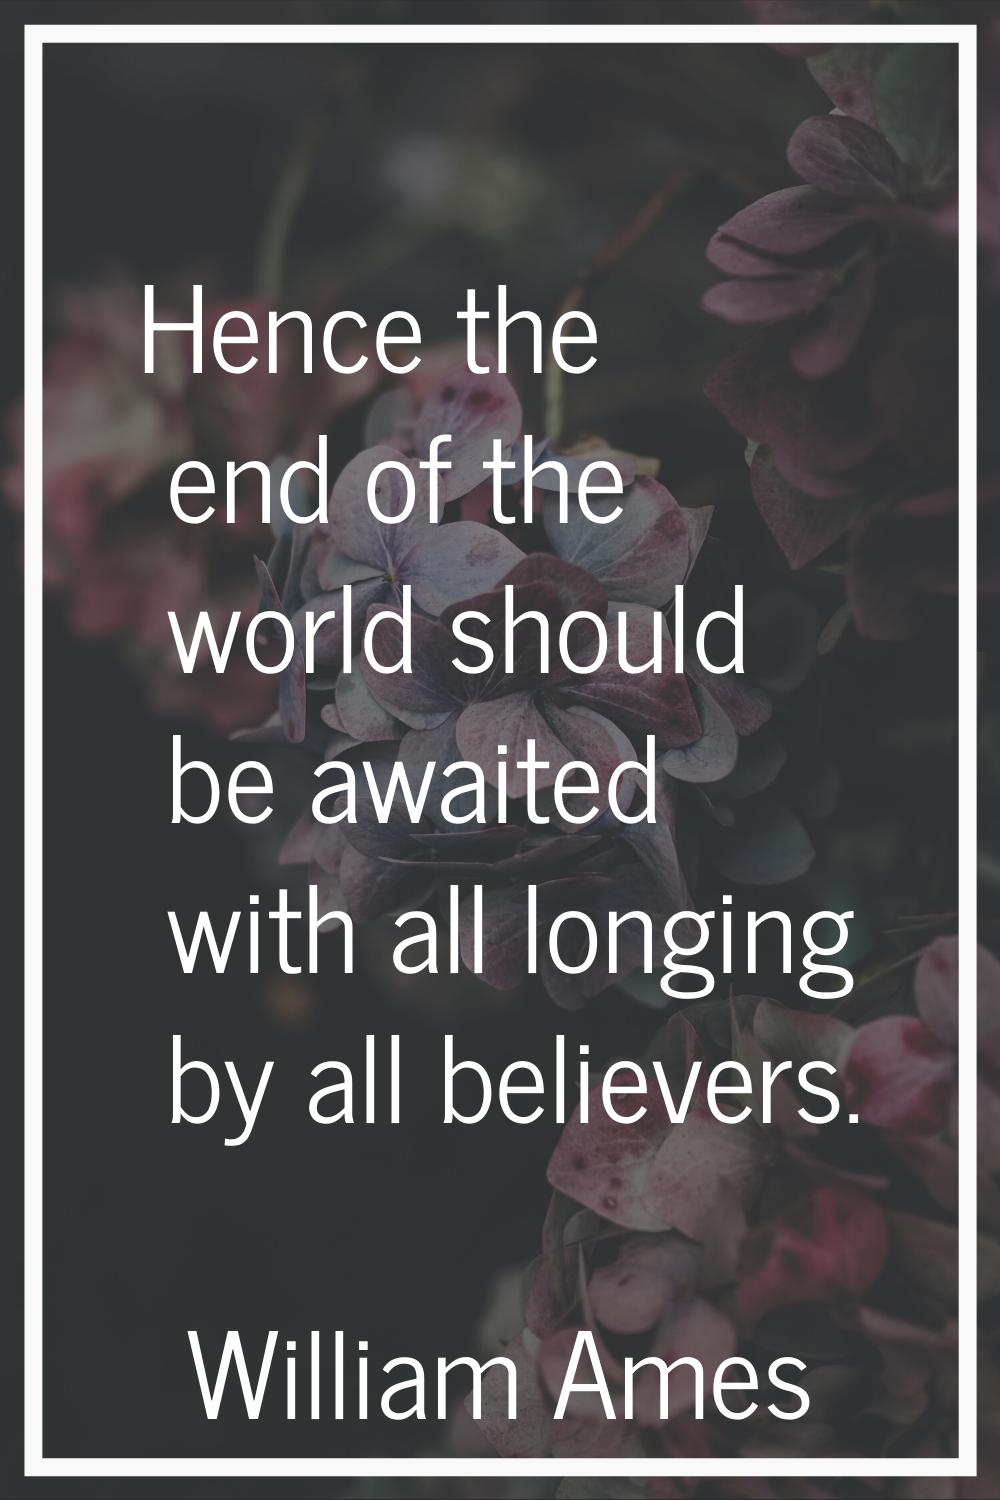 Hence the end of the world should be awaited with all longing by all believers.